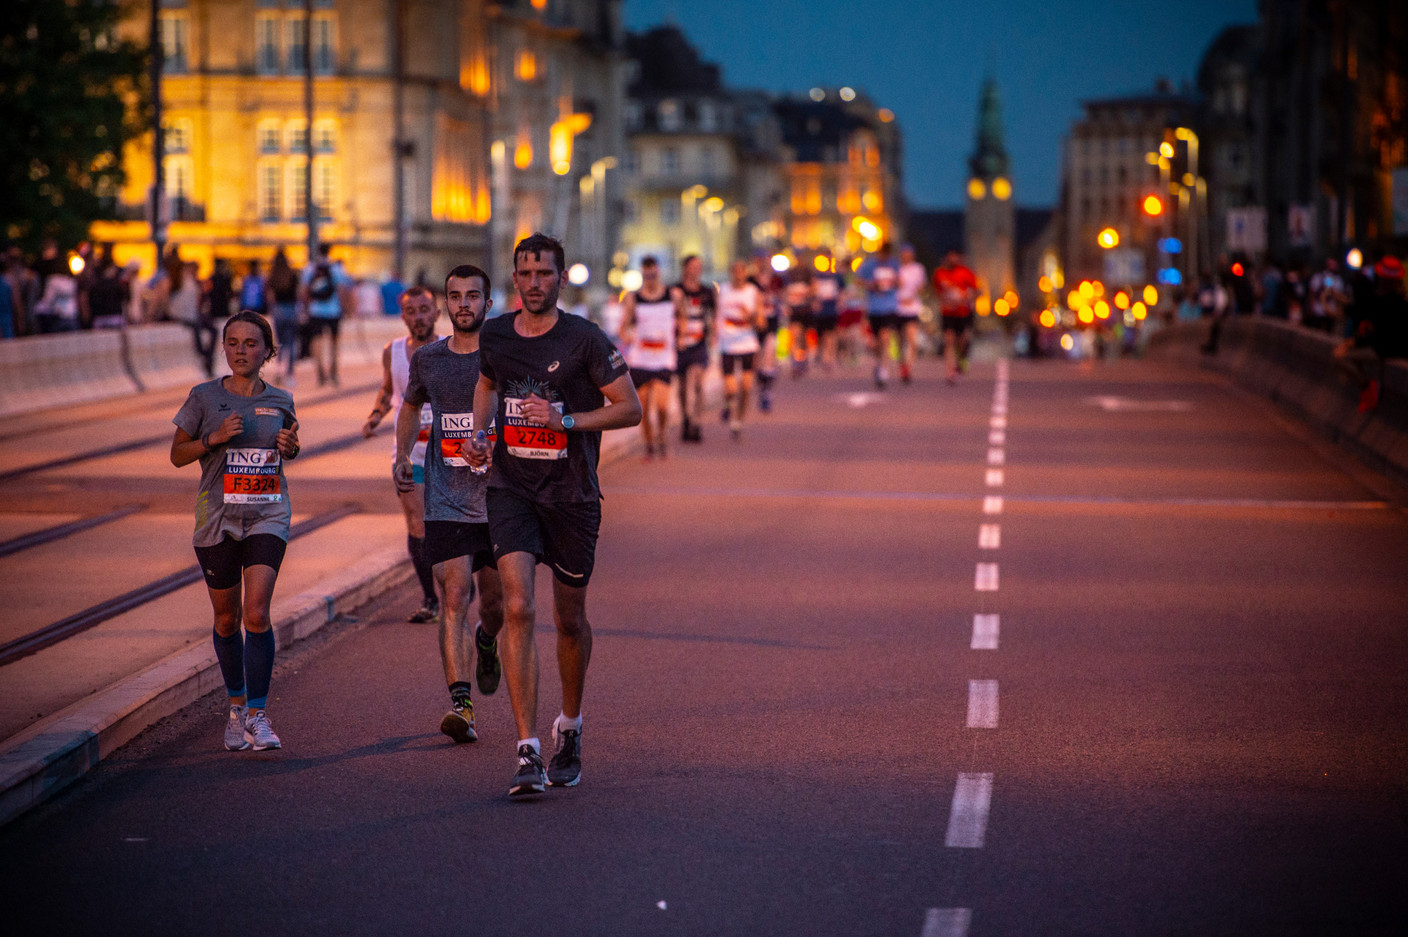 A total of 12,000 runners took part in the event according to ING’s website with an estimated 100,000 spectators cheering on the participants.  Anthony Dehez